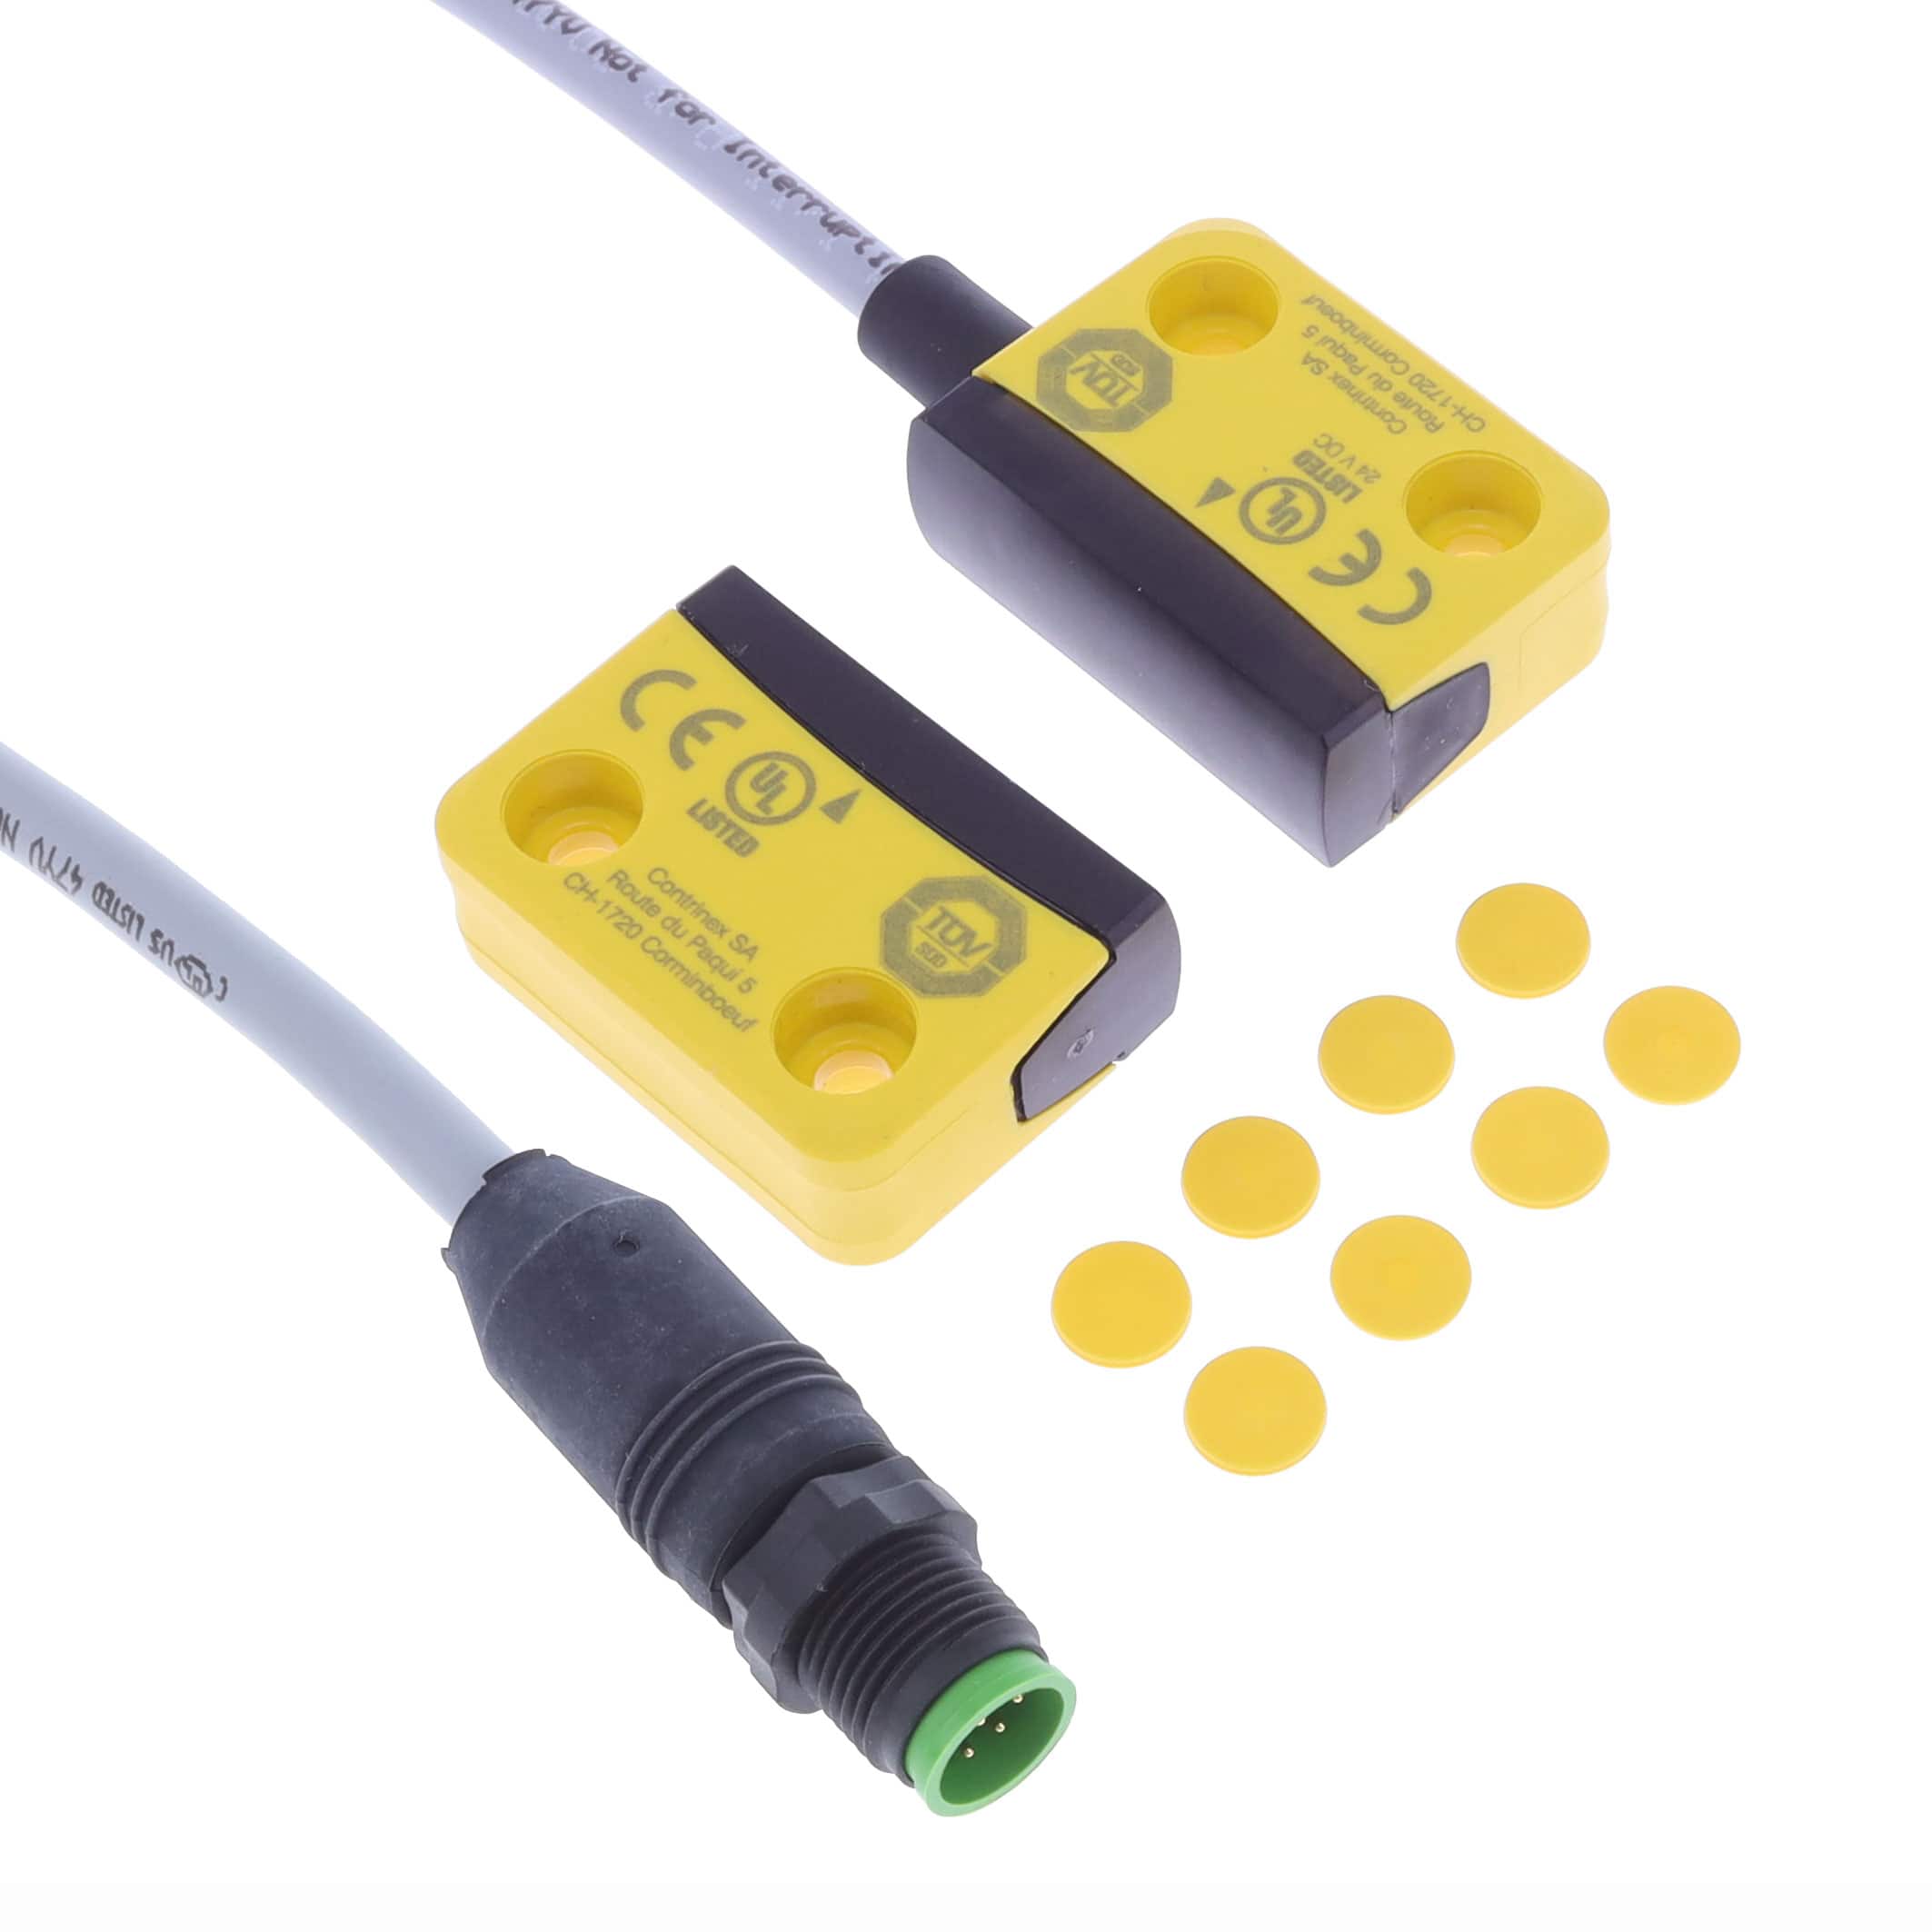 【1202570015】RFID CODED SAFETY SWITCH, 8MM RA